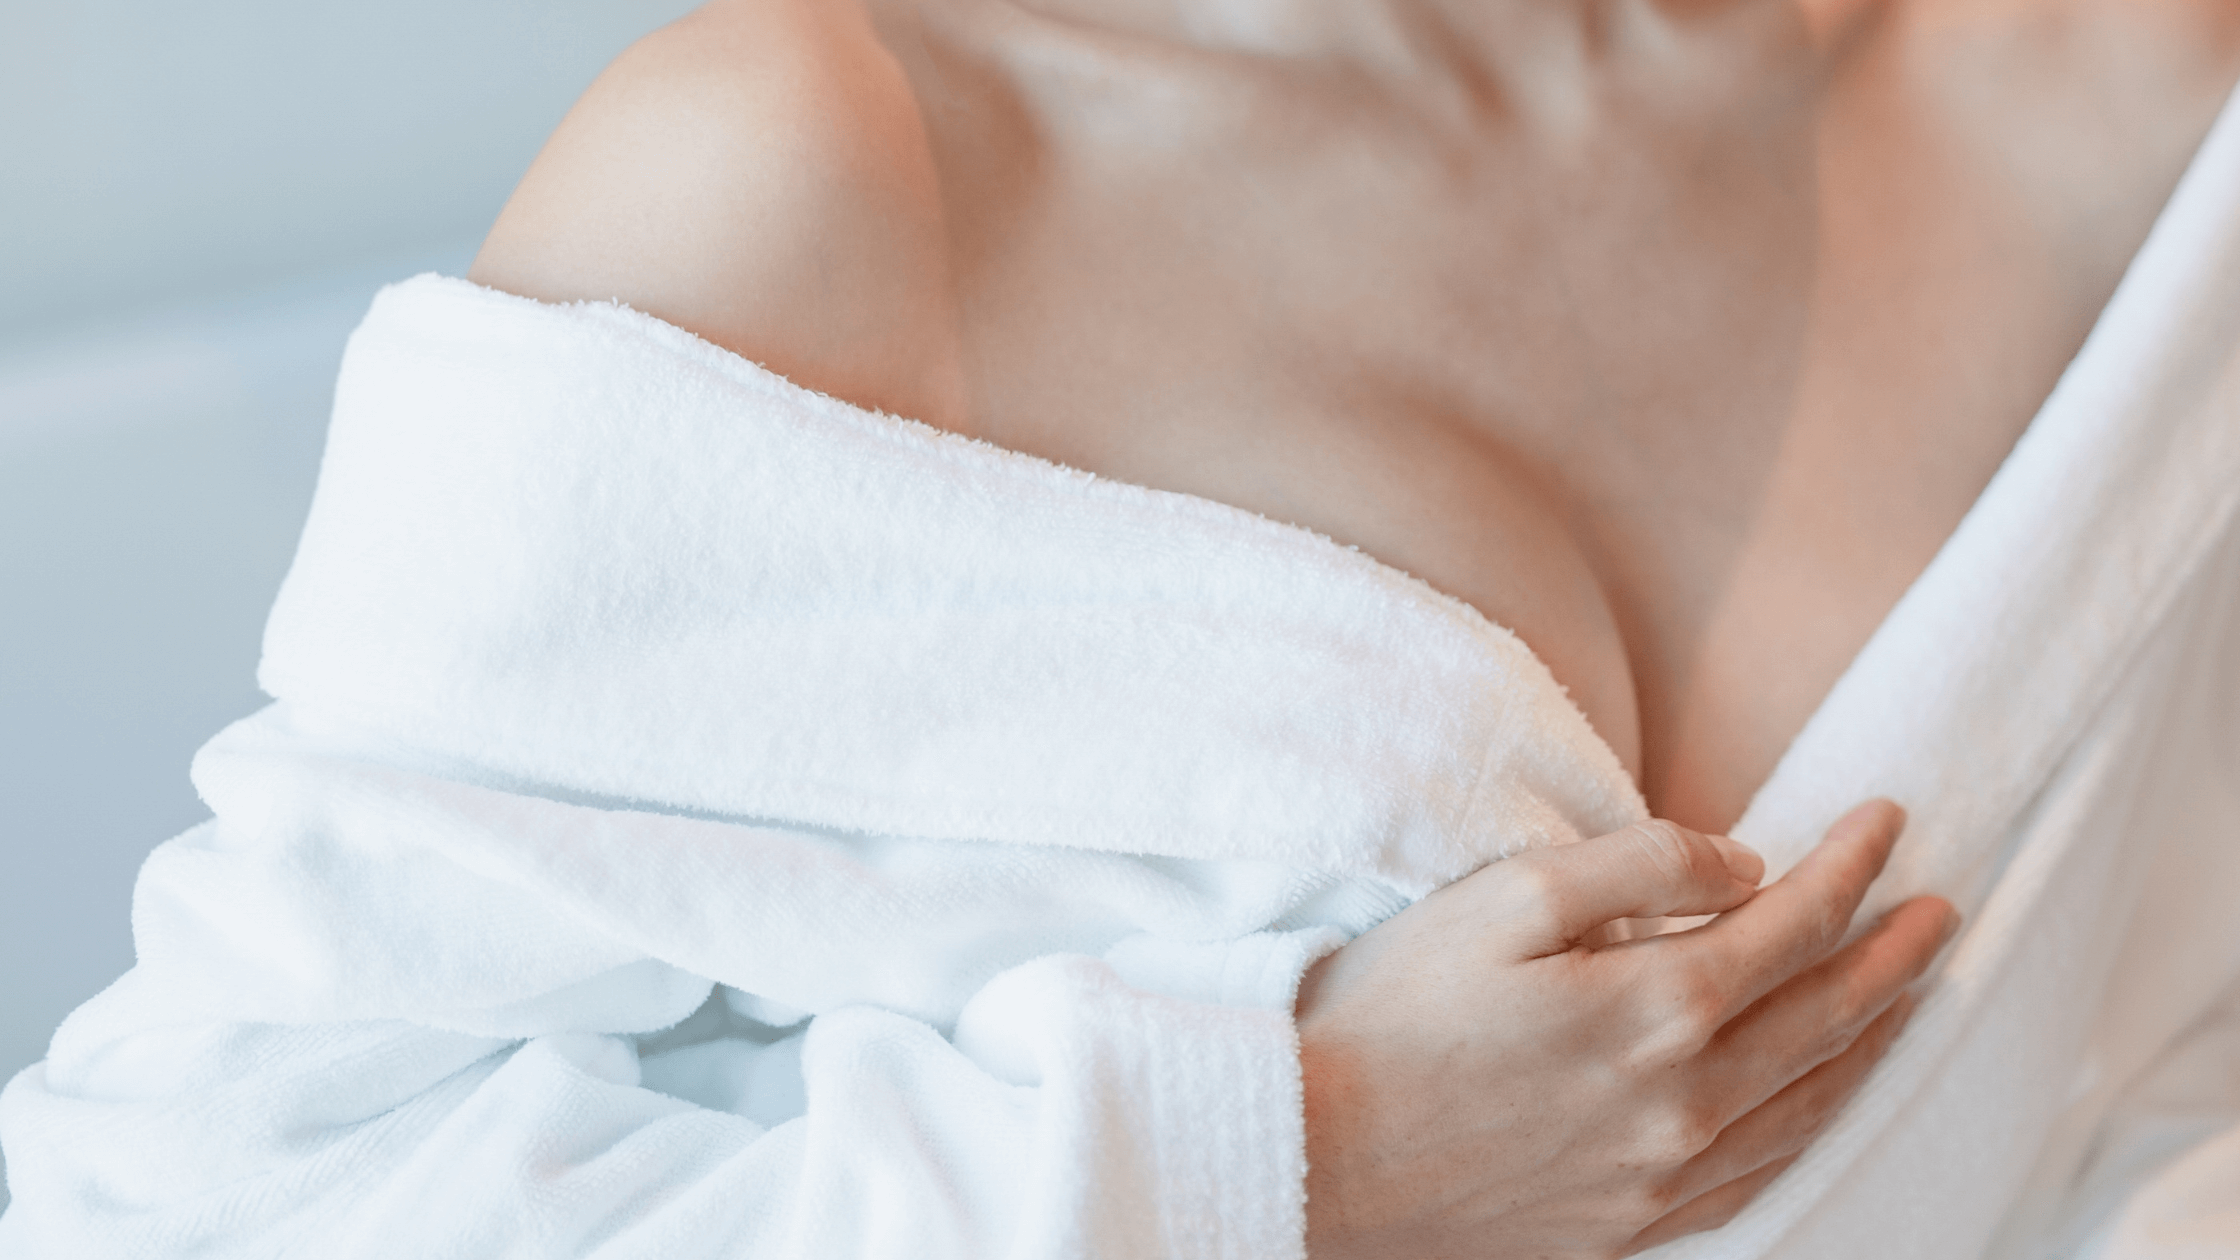 Breast Lift vs. Breast Augmentation: Which Procedure Is Right for You?